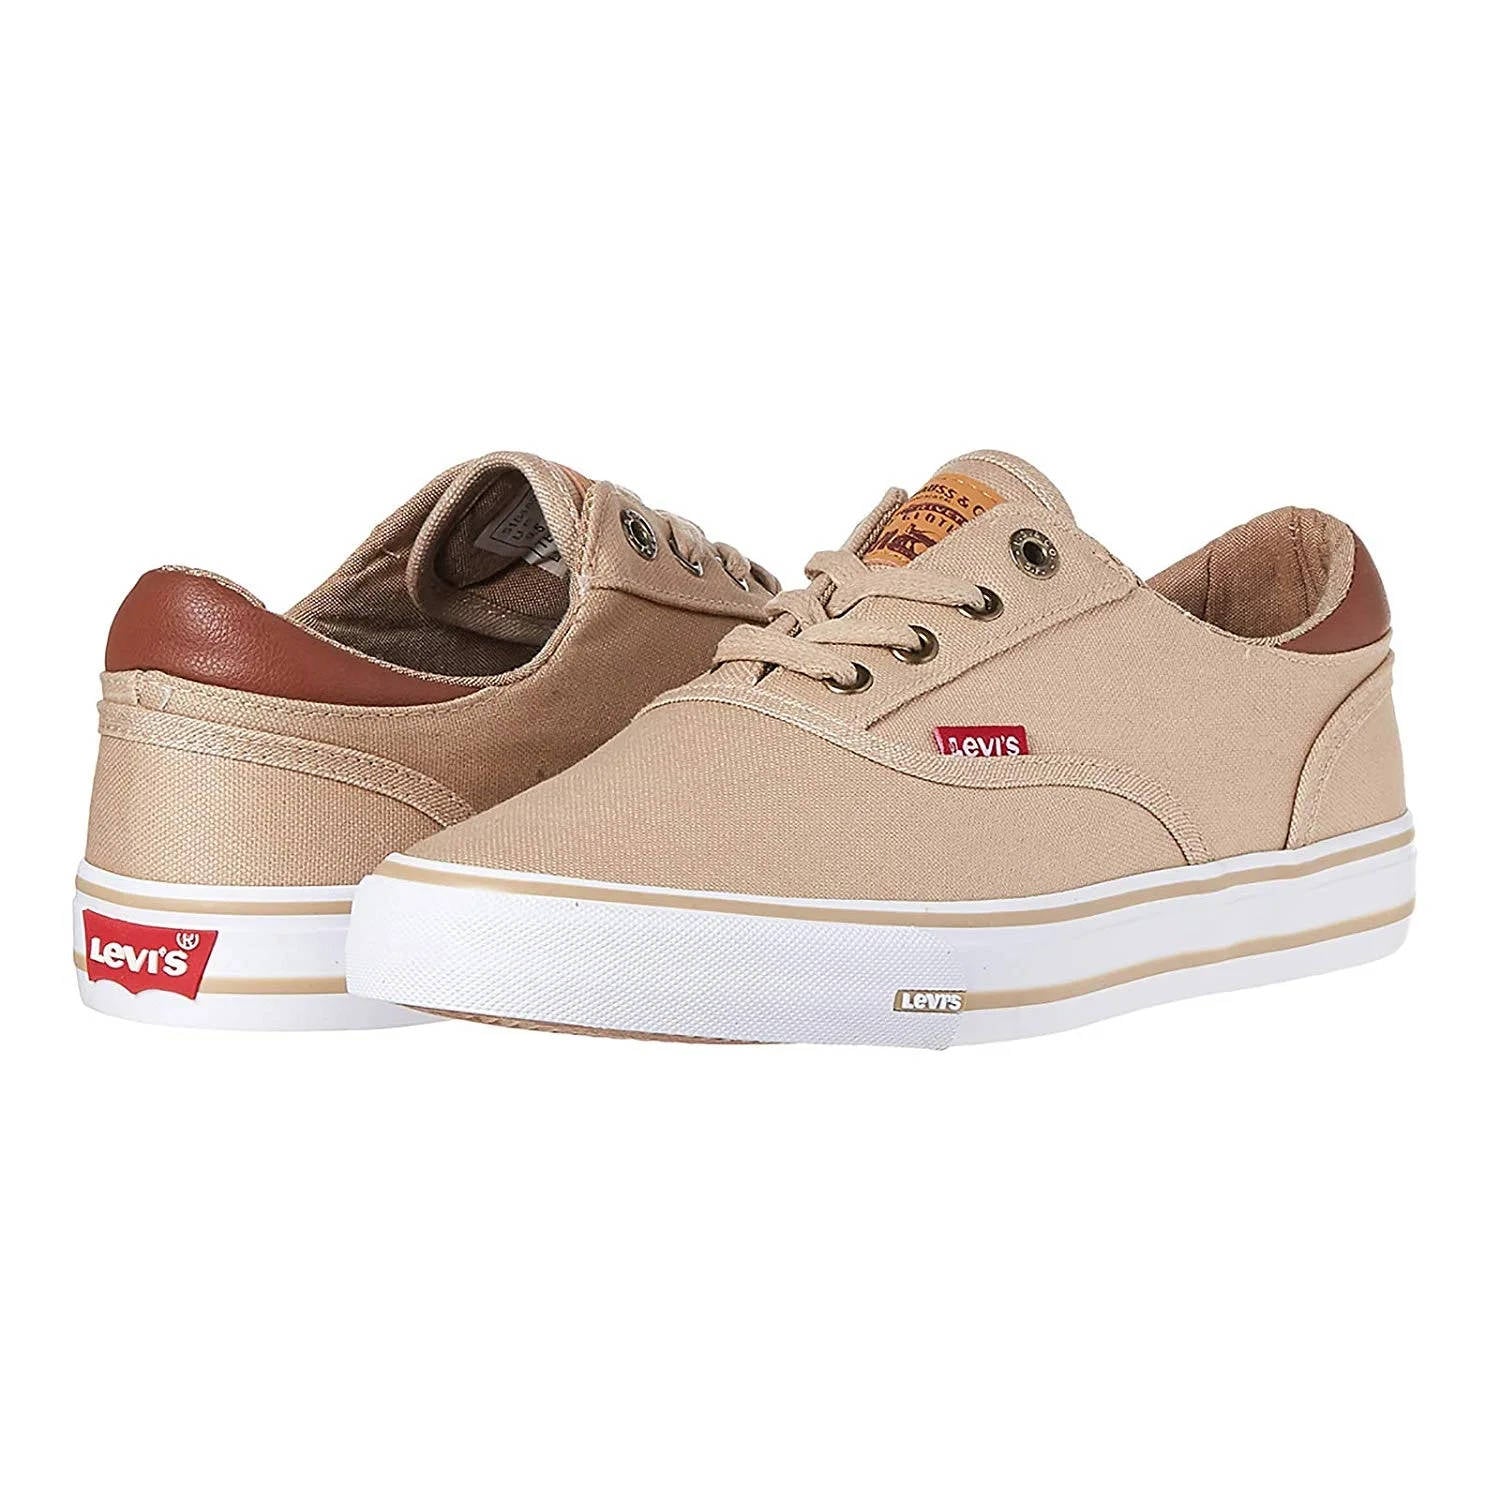 Levi's Mens Ethan Canvas Sneakers